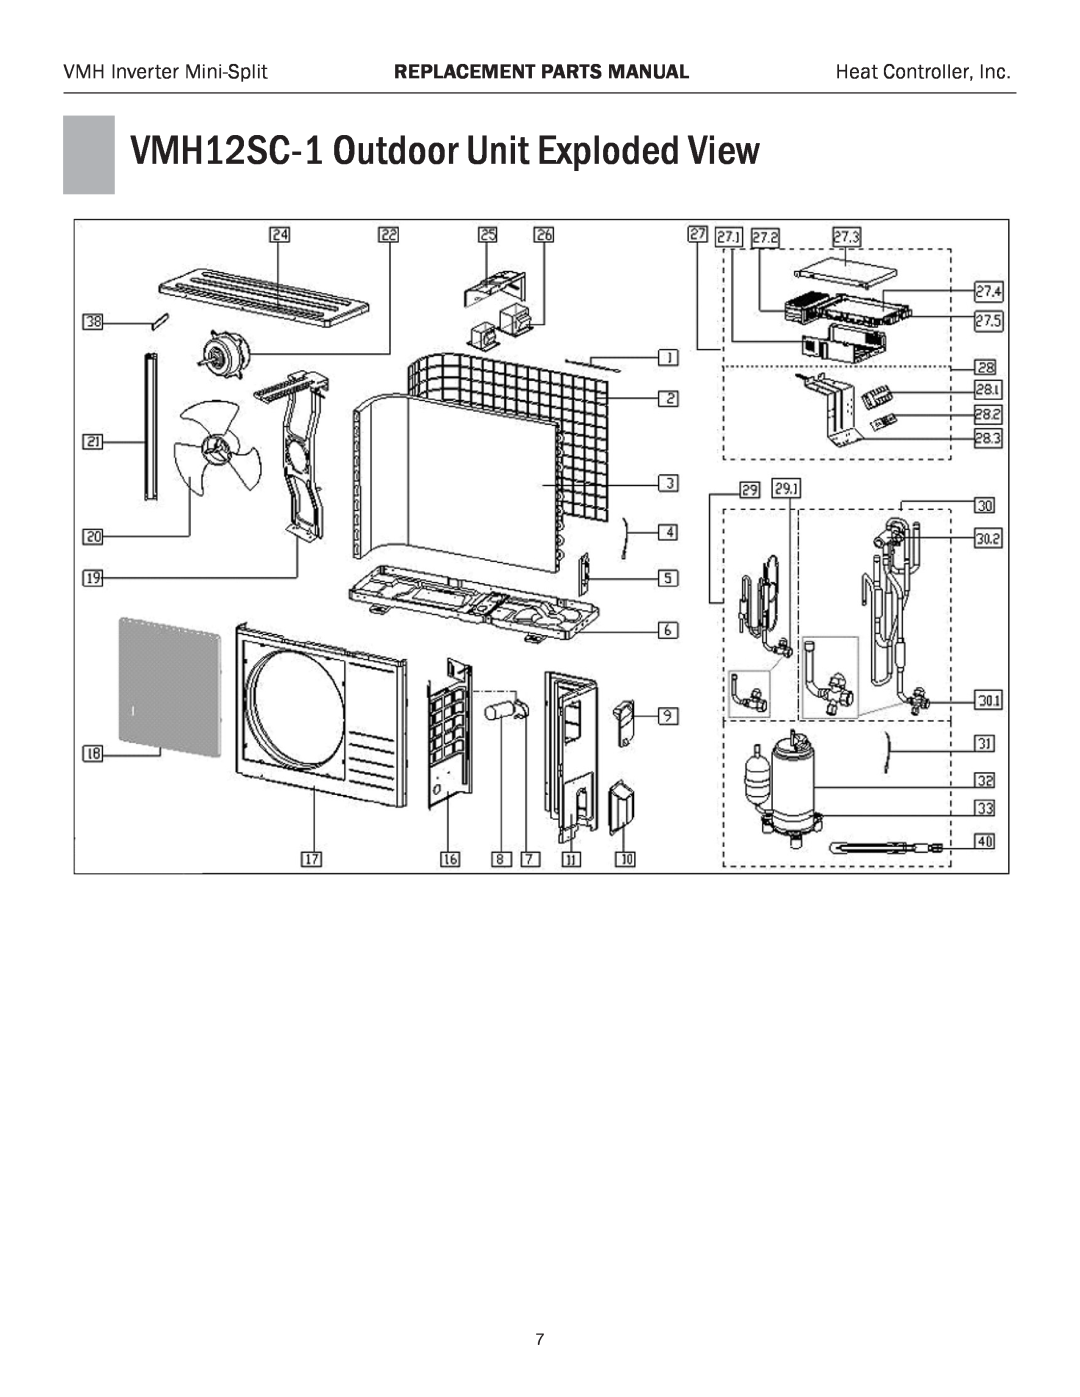 Heat Controller VMH 24 manual VMH12SC-1Outdoor Unit Exploded View, VMH Inverter Mini-Split, Replacement Parts Manual 